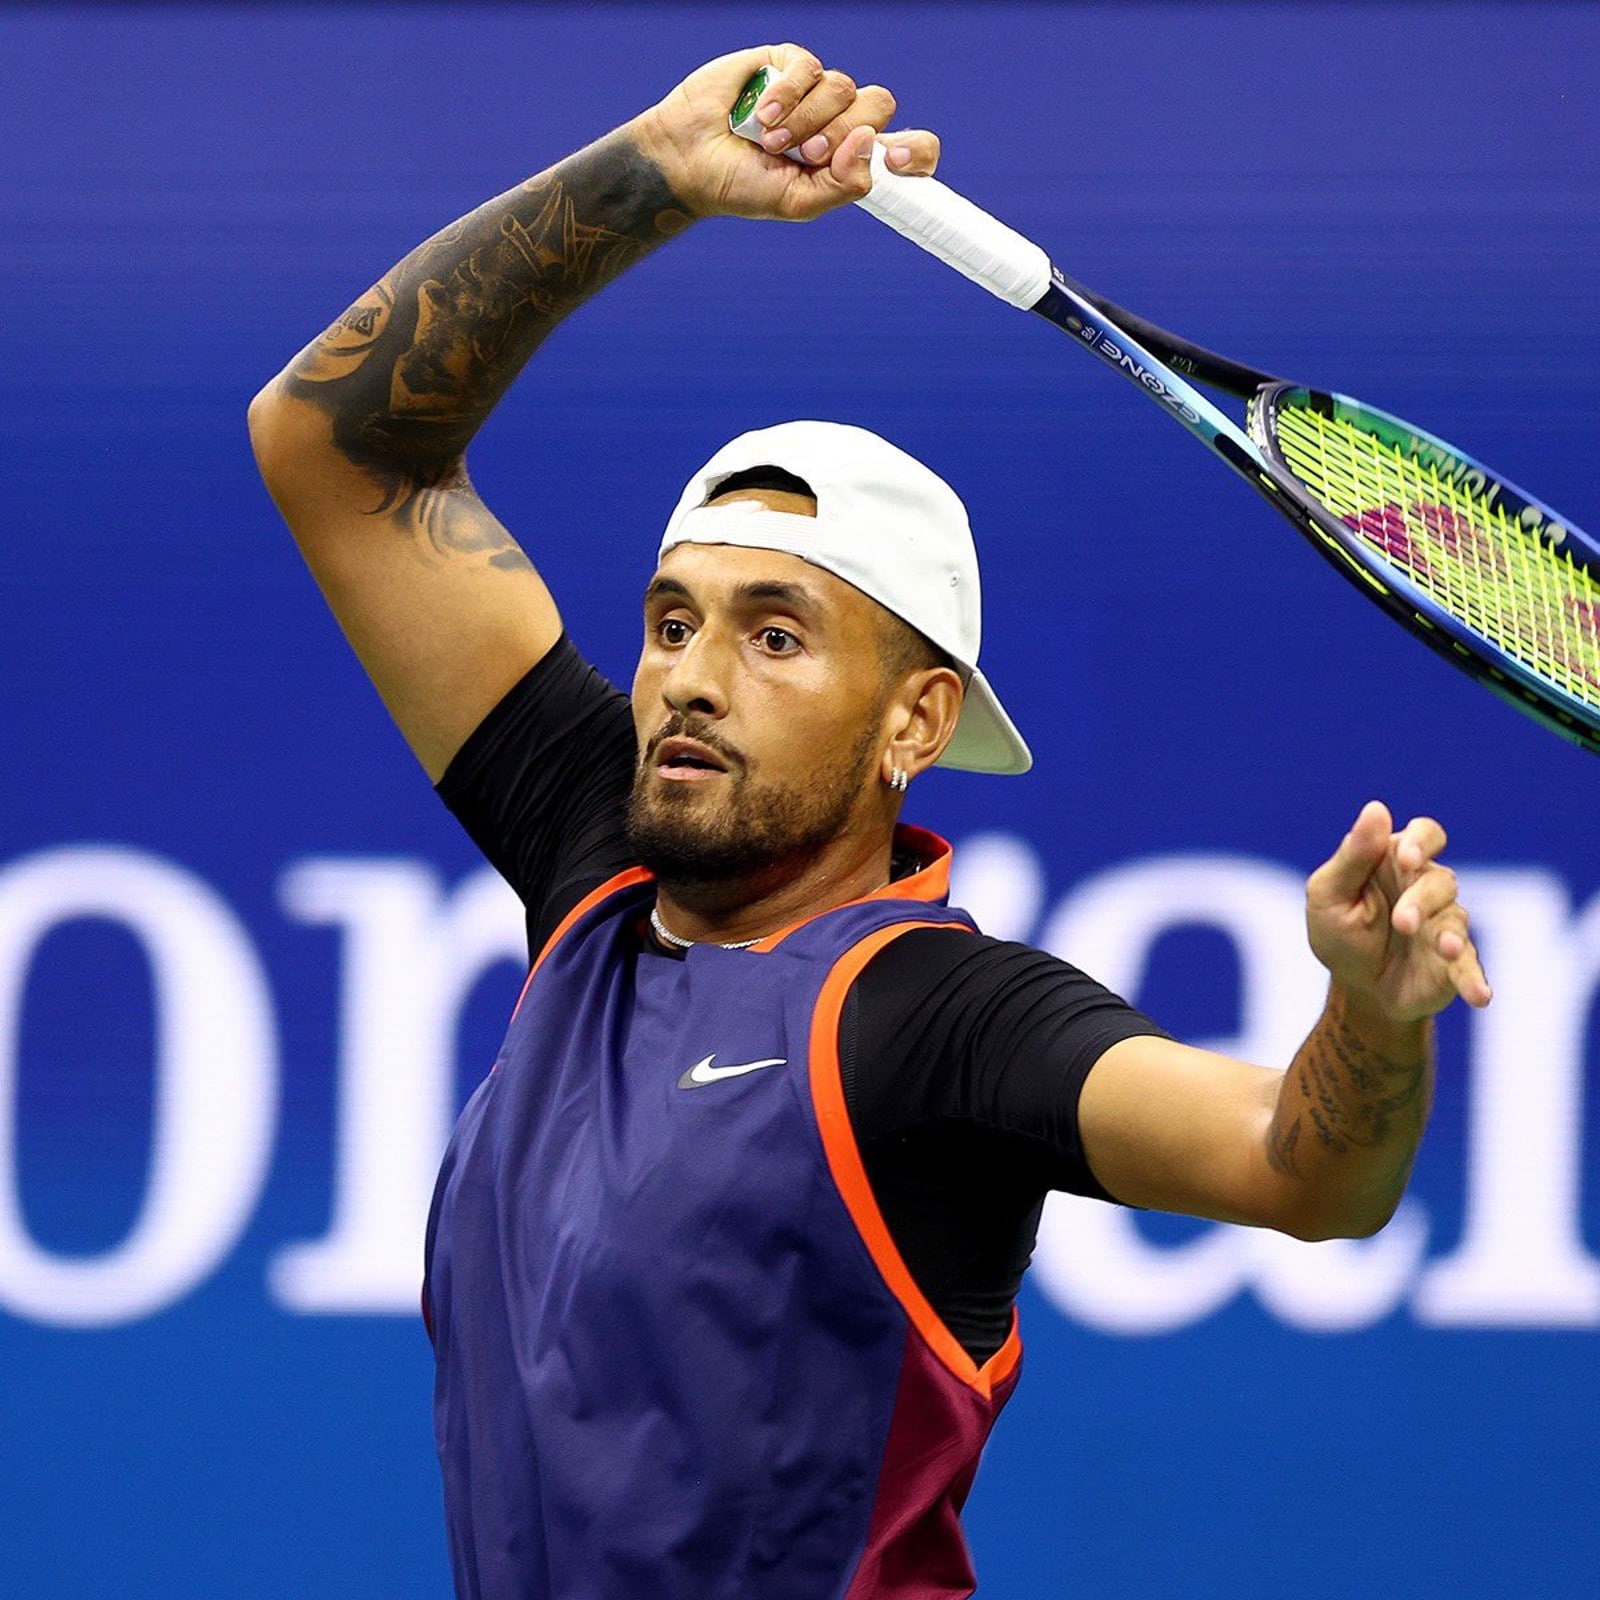 Never Want to Play Each Other, Says Nick Kyrgios After Defeating Kokkinakis in US Open